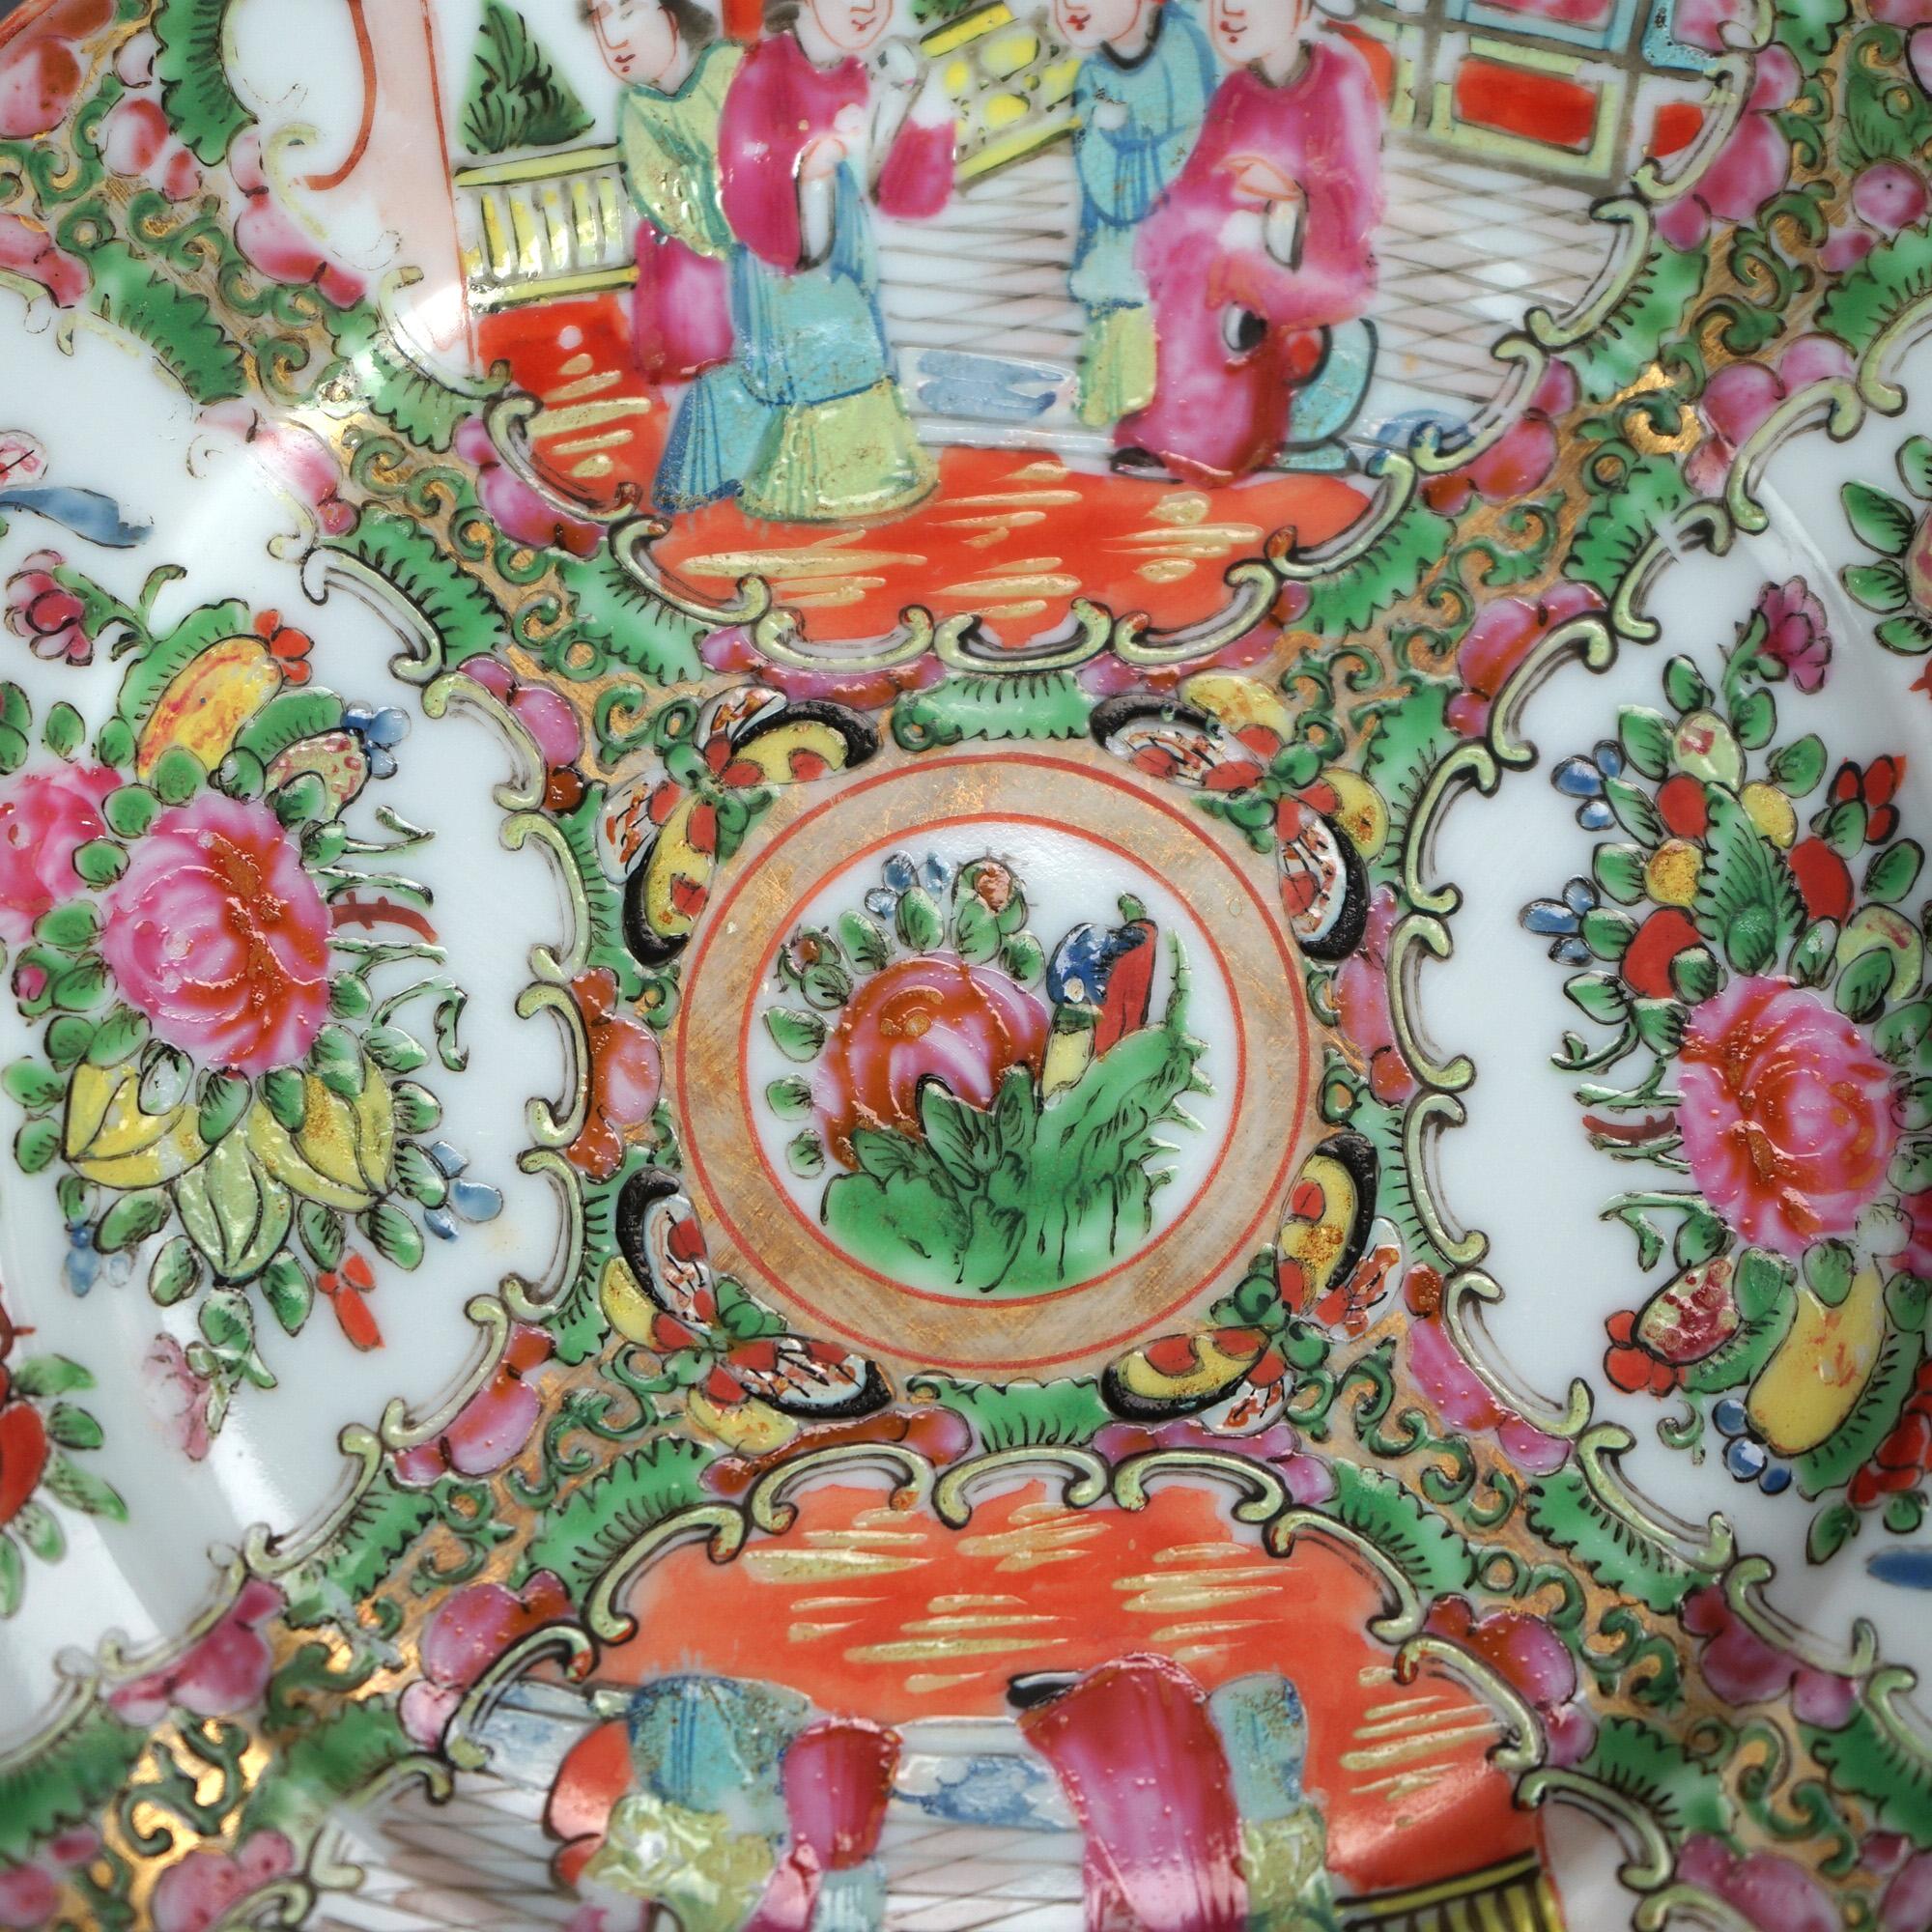 Antique Chinese Rose Medallion Porcelain Plates with Gardens & Figures C1900 For Sale 1